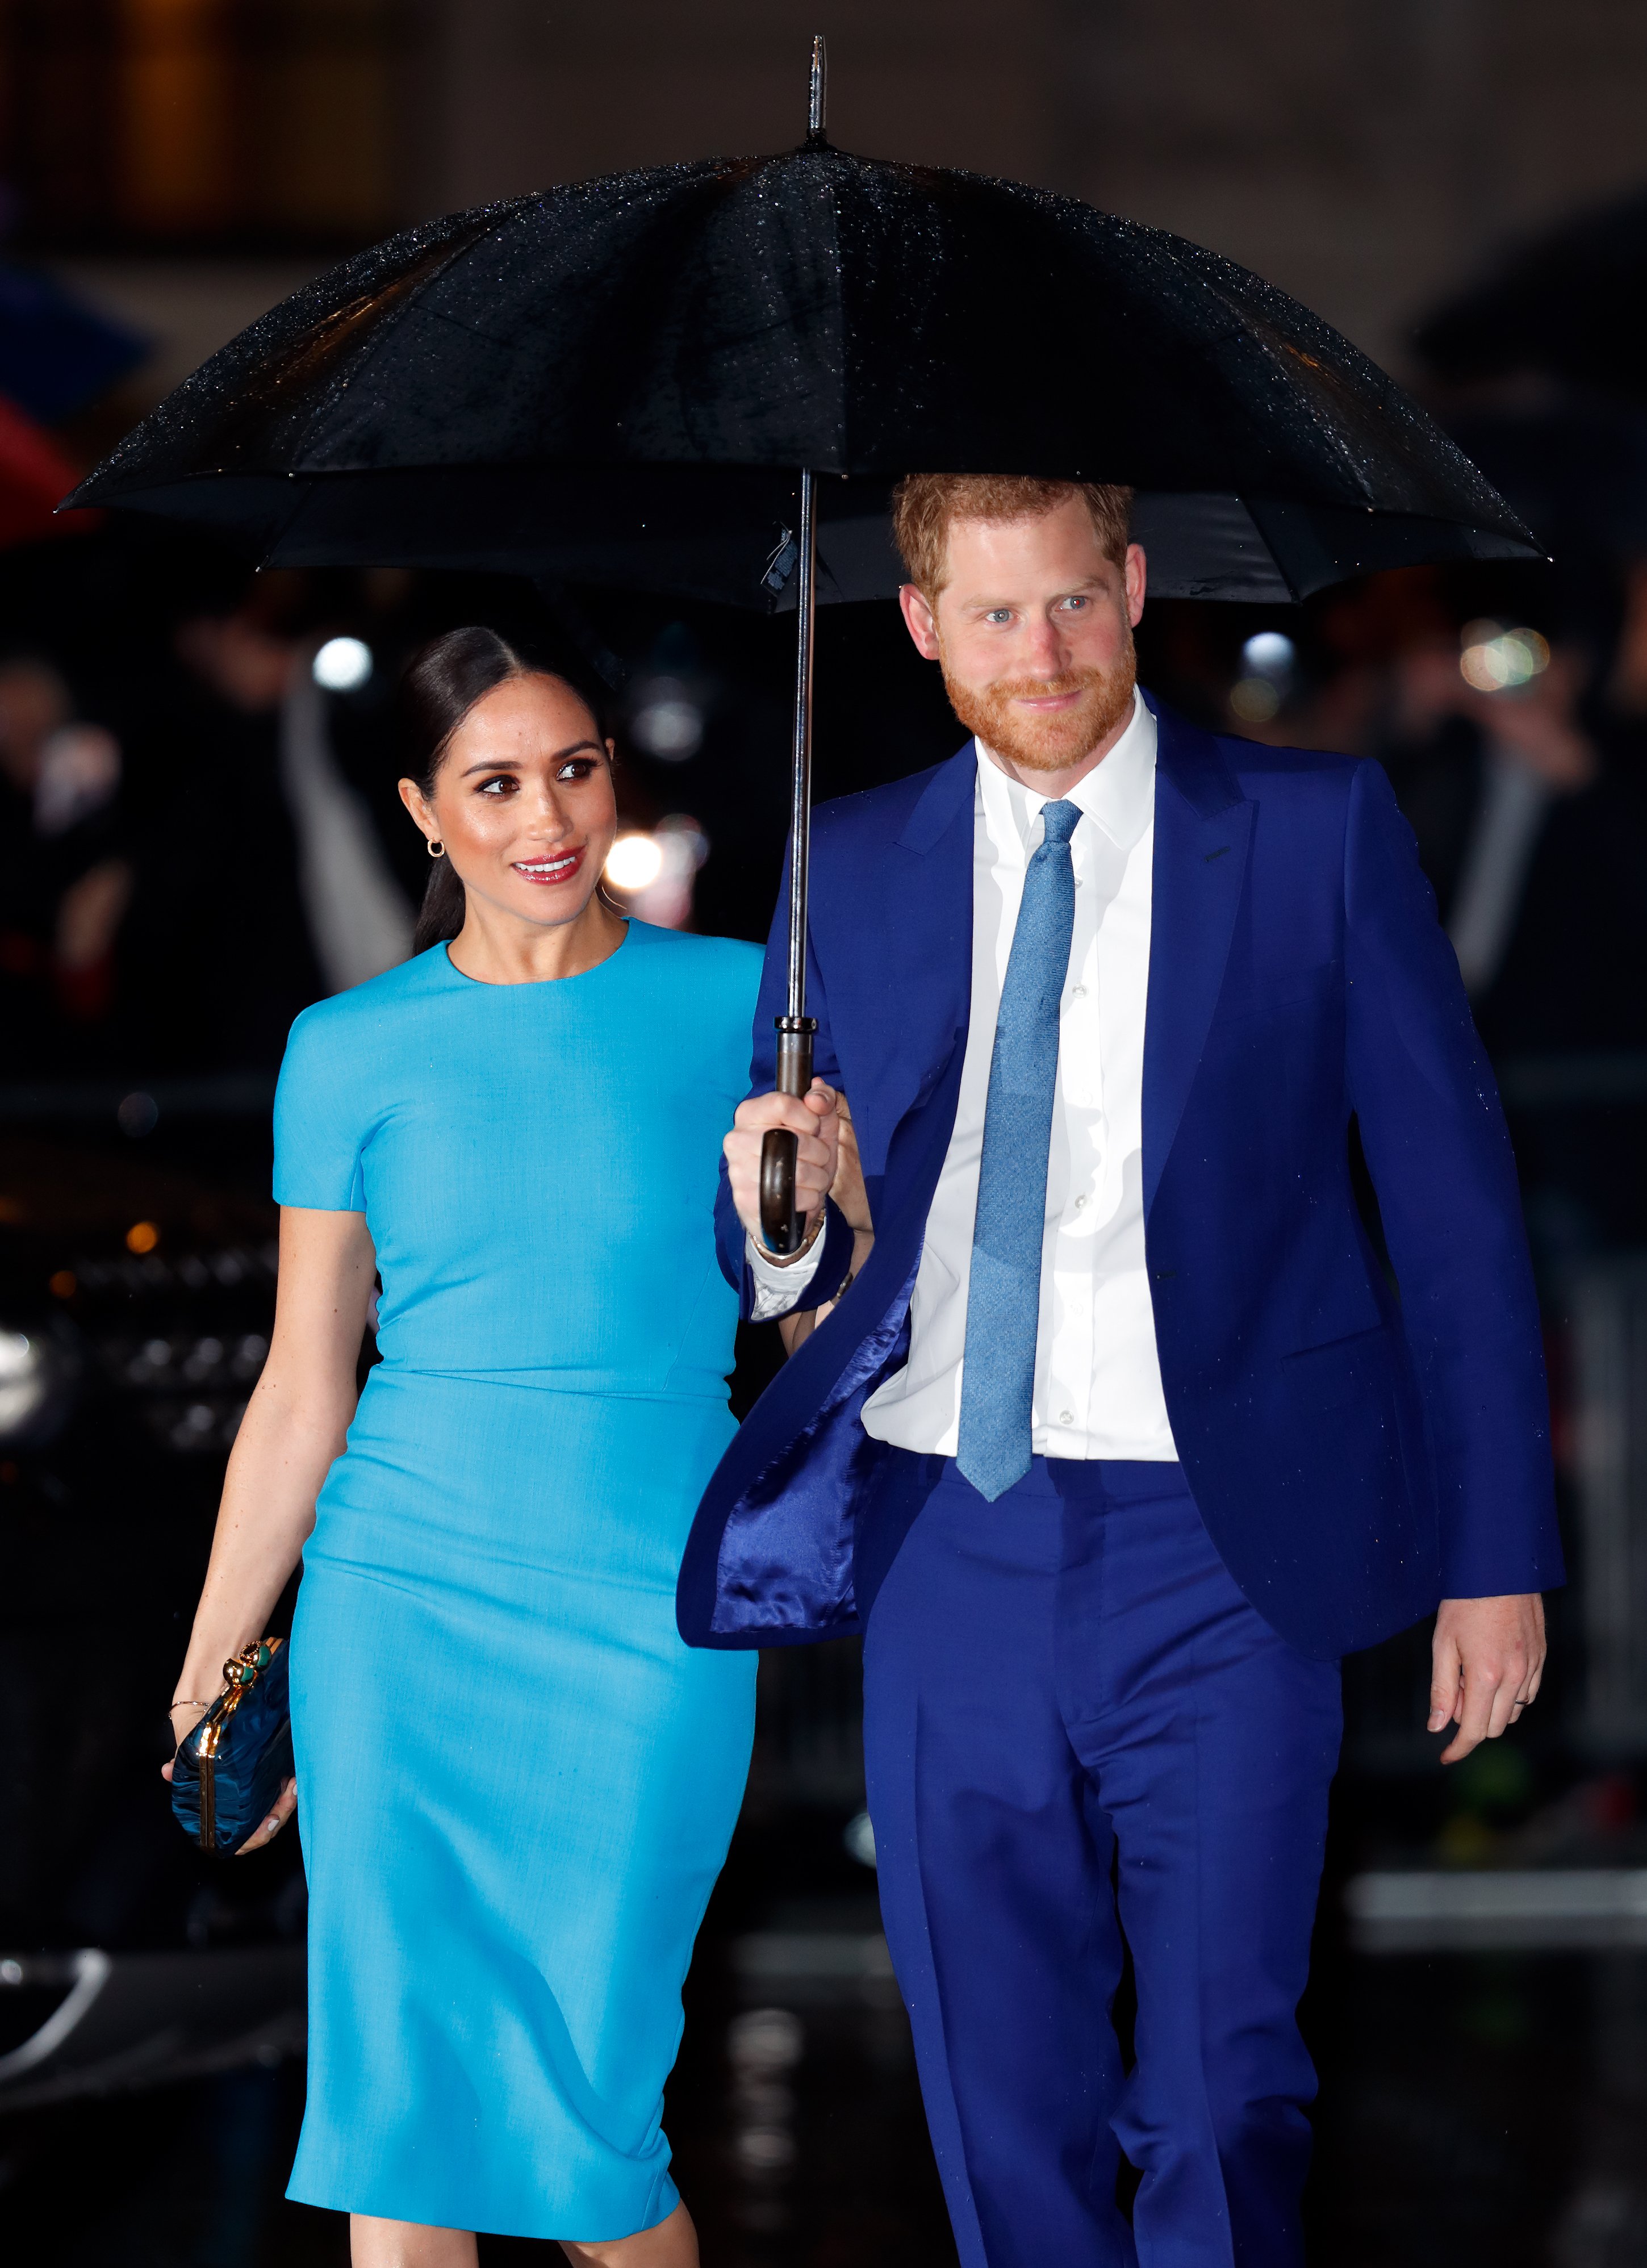 Meghan, Duchess of Sussex and Prince Harry, Duke of Sussex attend The Endeavour Fund Awards at Mansion House on March 5, 2020 in London, England | Photo: Getty Images